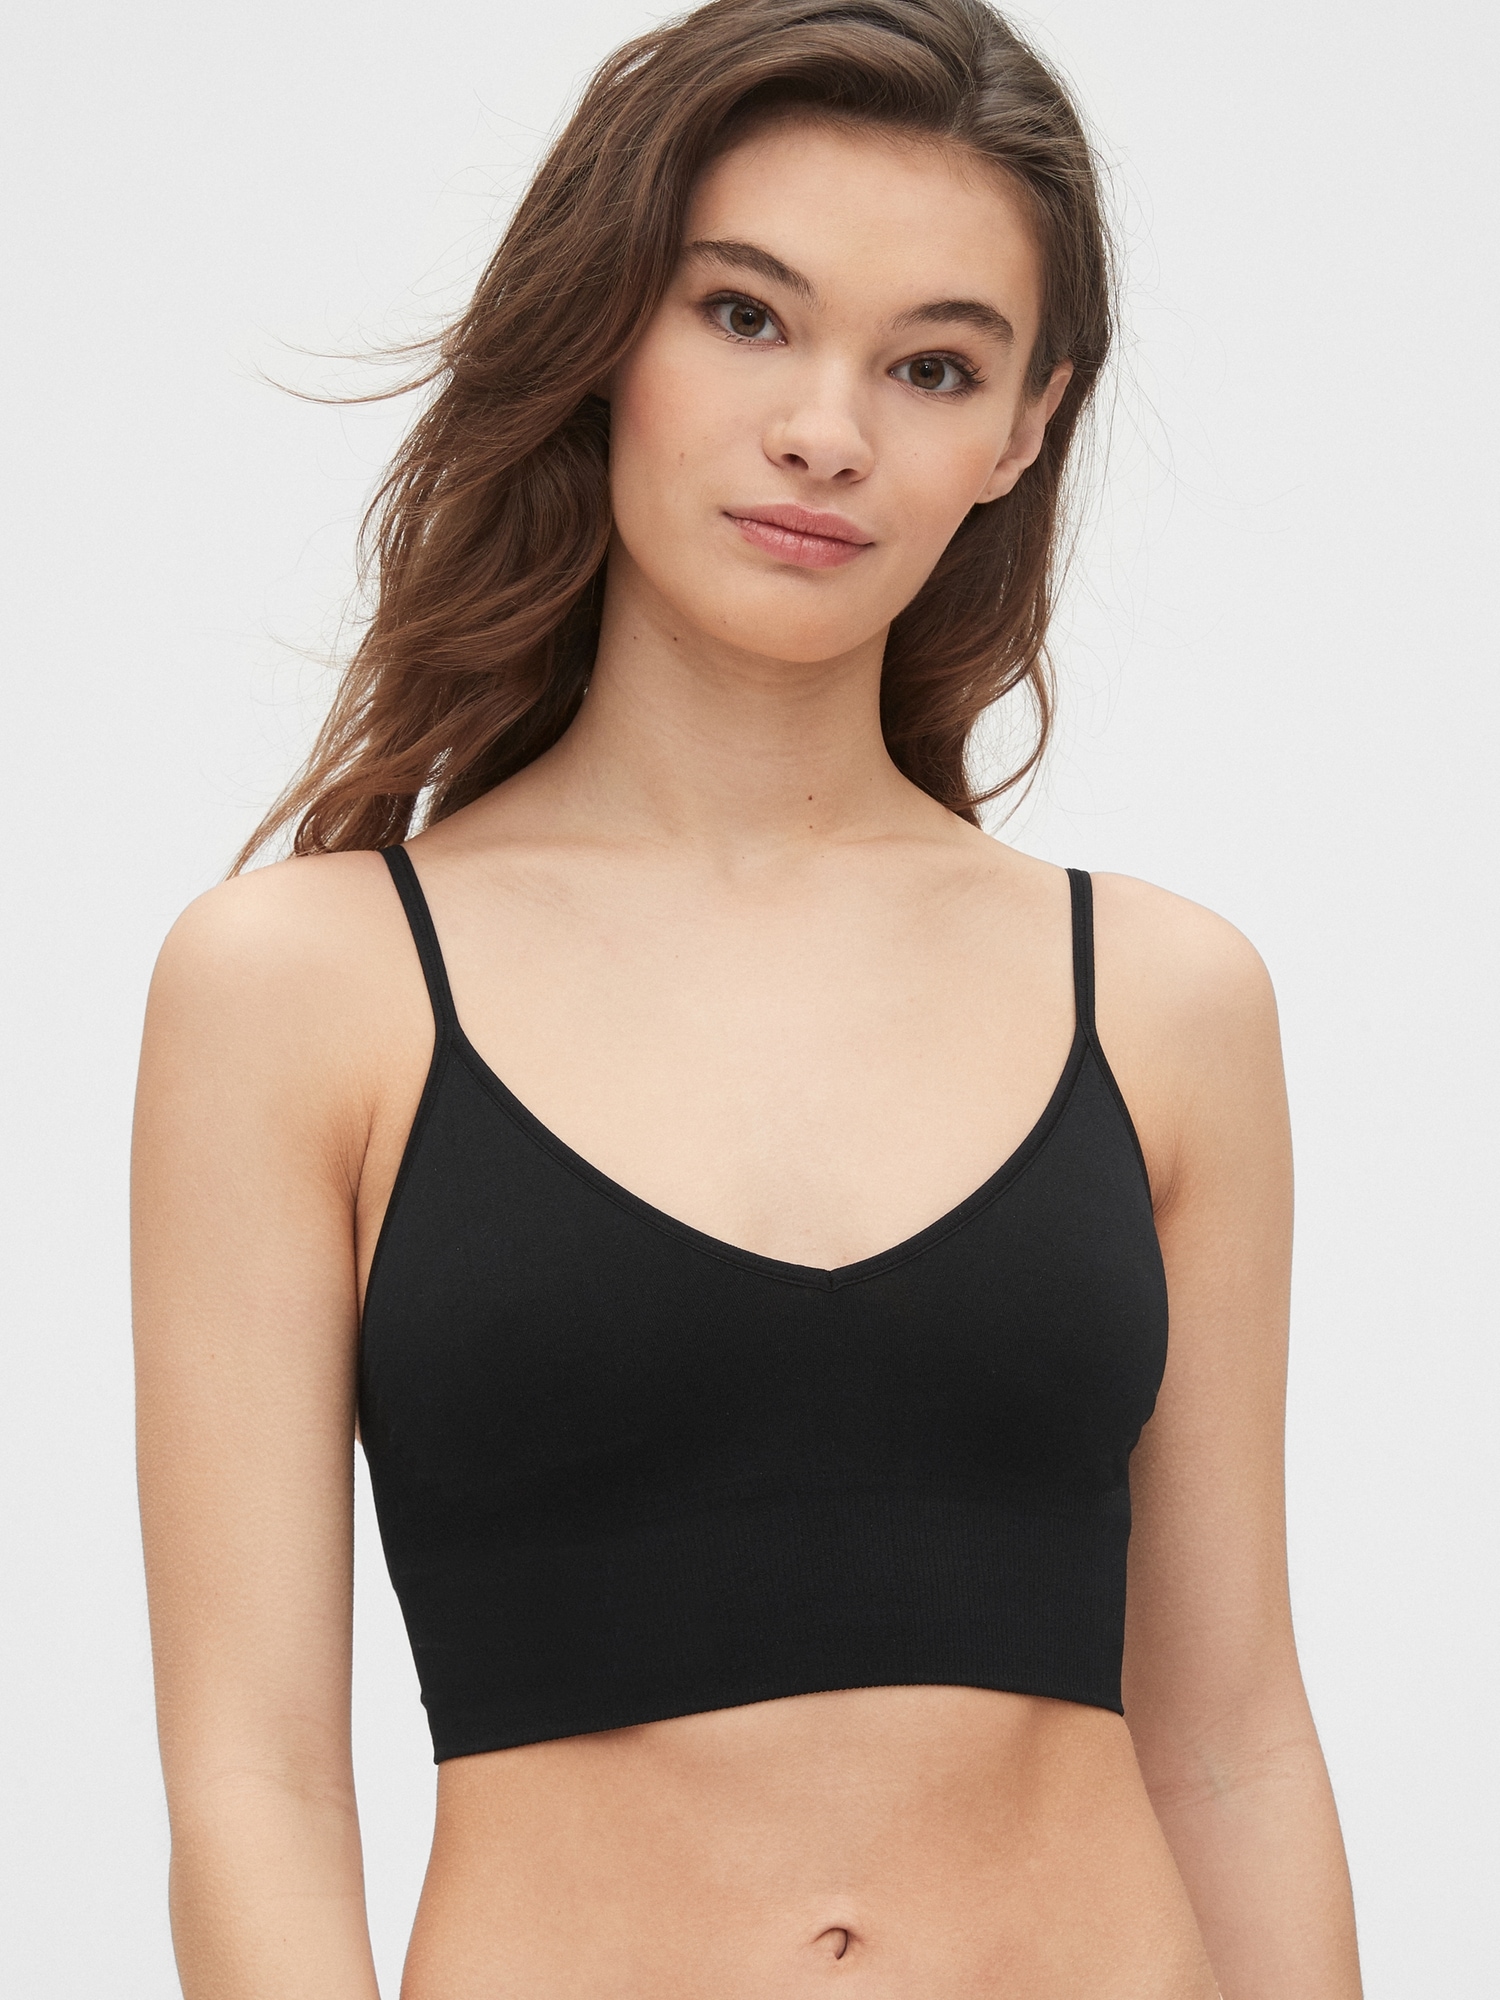 I'm a 34C, and This Surprisingly Supportive Bralette Is the Only